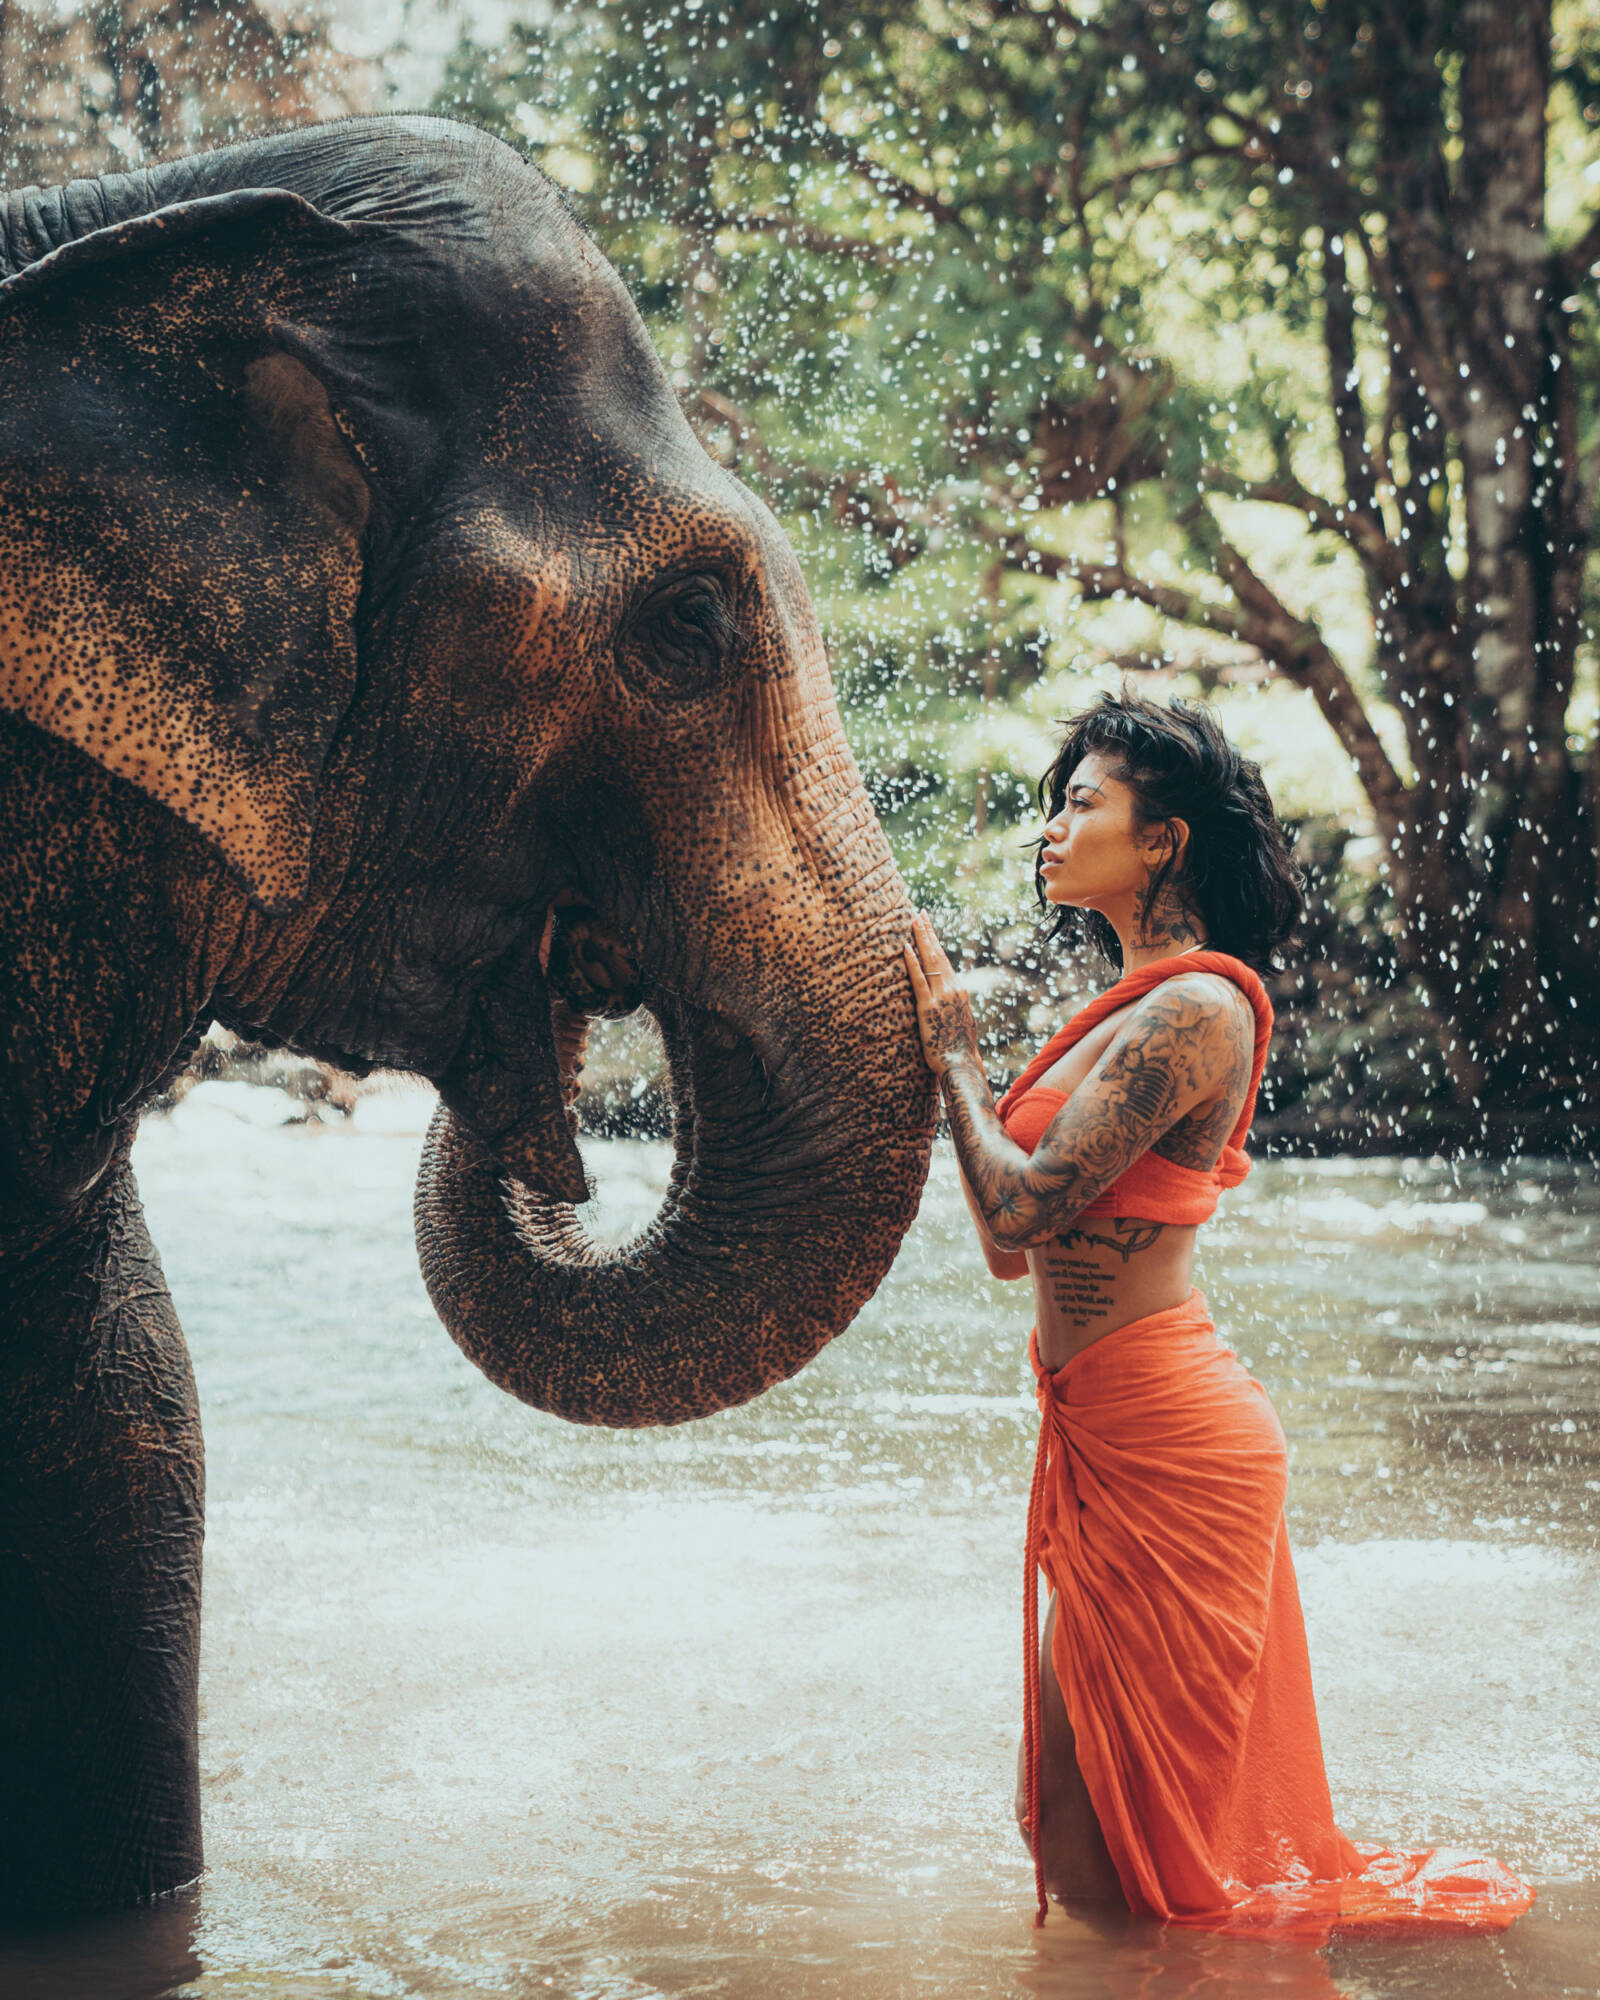 Have your picture taken with an elephant in the river